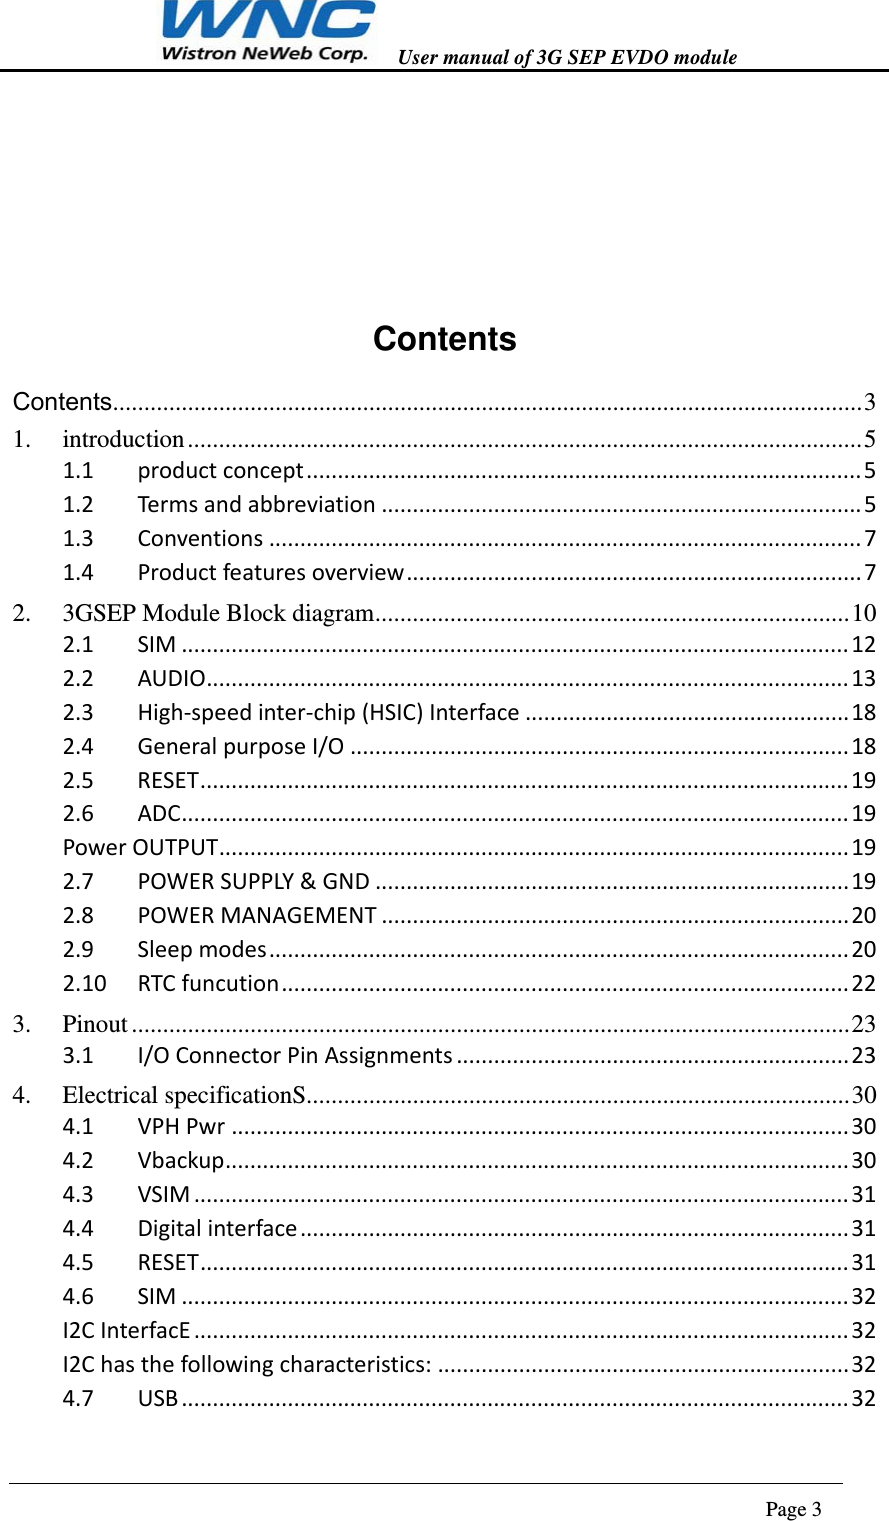   User manual of 3G SEP EVDO module                                                                      Page 3       Contents Contents........................................................................................................................ 31.introduction ............................................................................................................ 51.1productconcept.........................................................................................51.2Termsandabbreviation.............................................................................51.3Conventions...............................................................................................71.4Productfeaturesoverview.........................................................................72.3GSEP Module Block diagram ............................................................................ 102.1SIM...........................................................................................................122.2AUDIO.......................................................................................................132.3High‐speedinter‐chip(HSIC)Interface....................................................182.4GeneralpurposeI/O................................................................................182.5RESET........................................................................................................192.6ADC...........................................................................................................19PowerOUTPUT.....................................................................................................192.7POWERSUPPLY&amp;GND............................................................................192.8POWERMANAGEMENT...........................................................................202.9Sleepmodes.............................................................................................202.10RTCfuncution...........................................................................................223.Pinout ................................................................................................................... 233.1I/OConnectorPinAssignments...............................................................234.Electrical specificationS ....................................................................................... 304.1VPHPwr...................................................................................................304.2Vbackup....................................................................................................304.3VSIM.........................................................................................................314.4Digitalinterface........................................................................................314.5RESET........................................................................................................314.6SIM...........................................................................................................32I2CInterfacE.........................................................................................................32I2Chasthefollowingcharacteristics:..................................................................324.7USB...........................................................................................................32